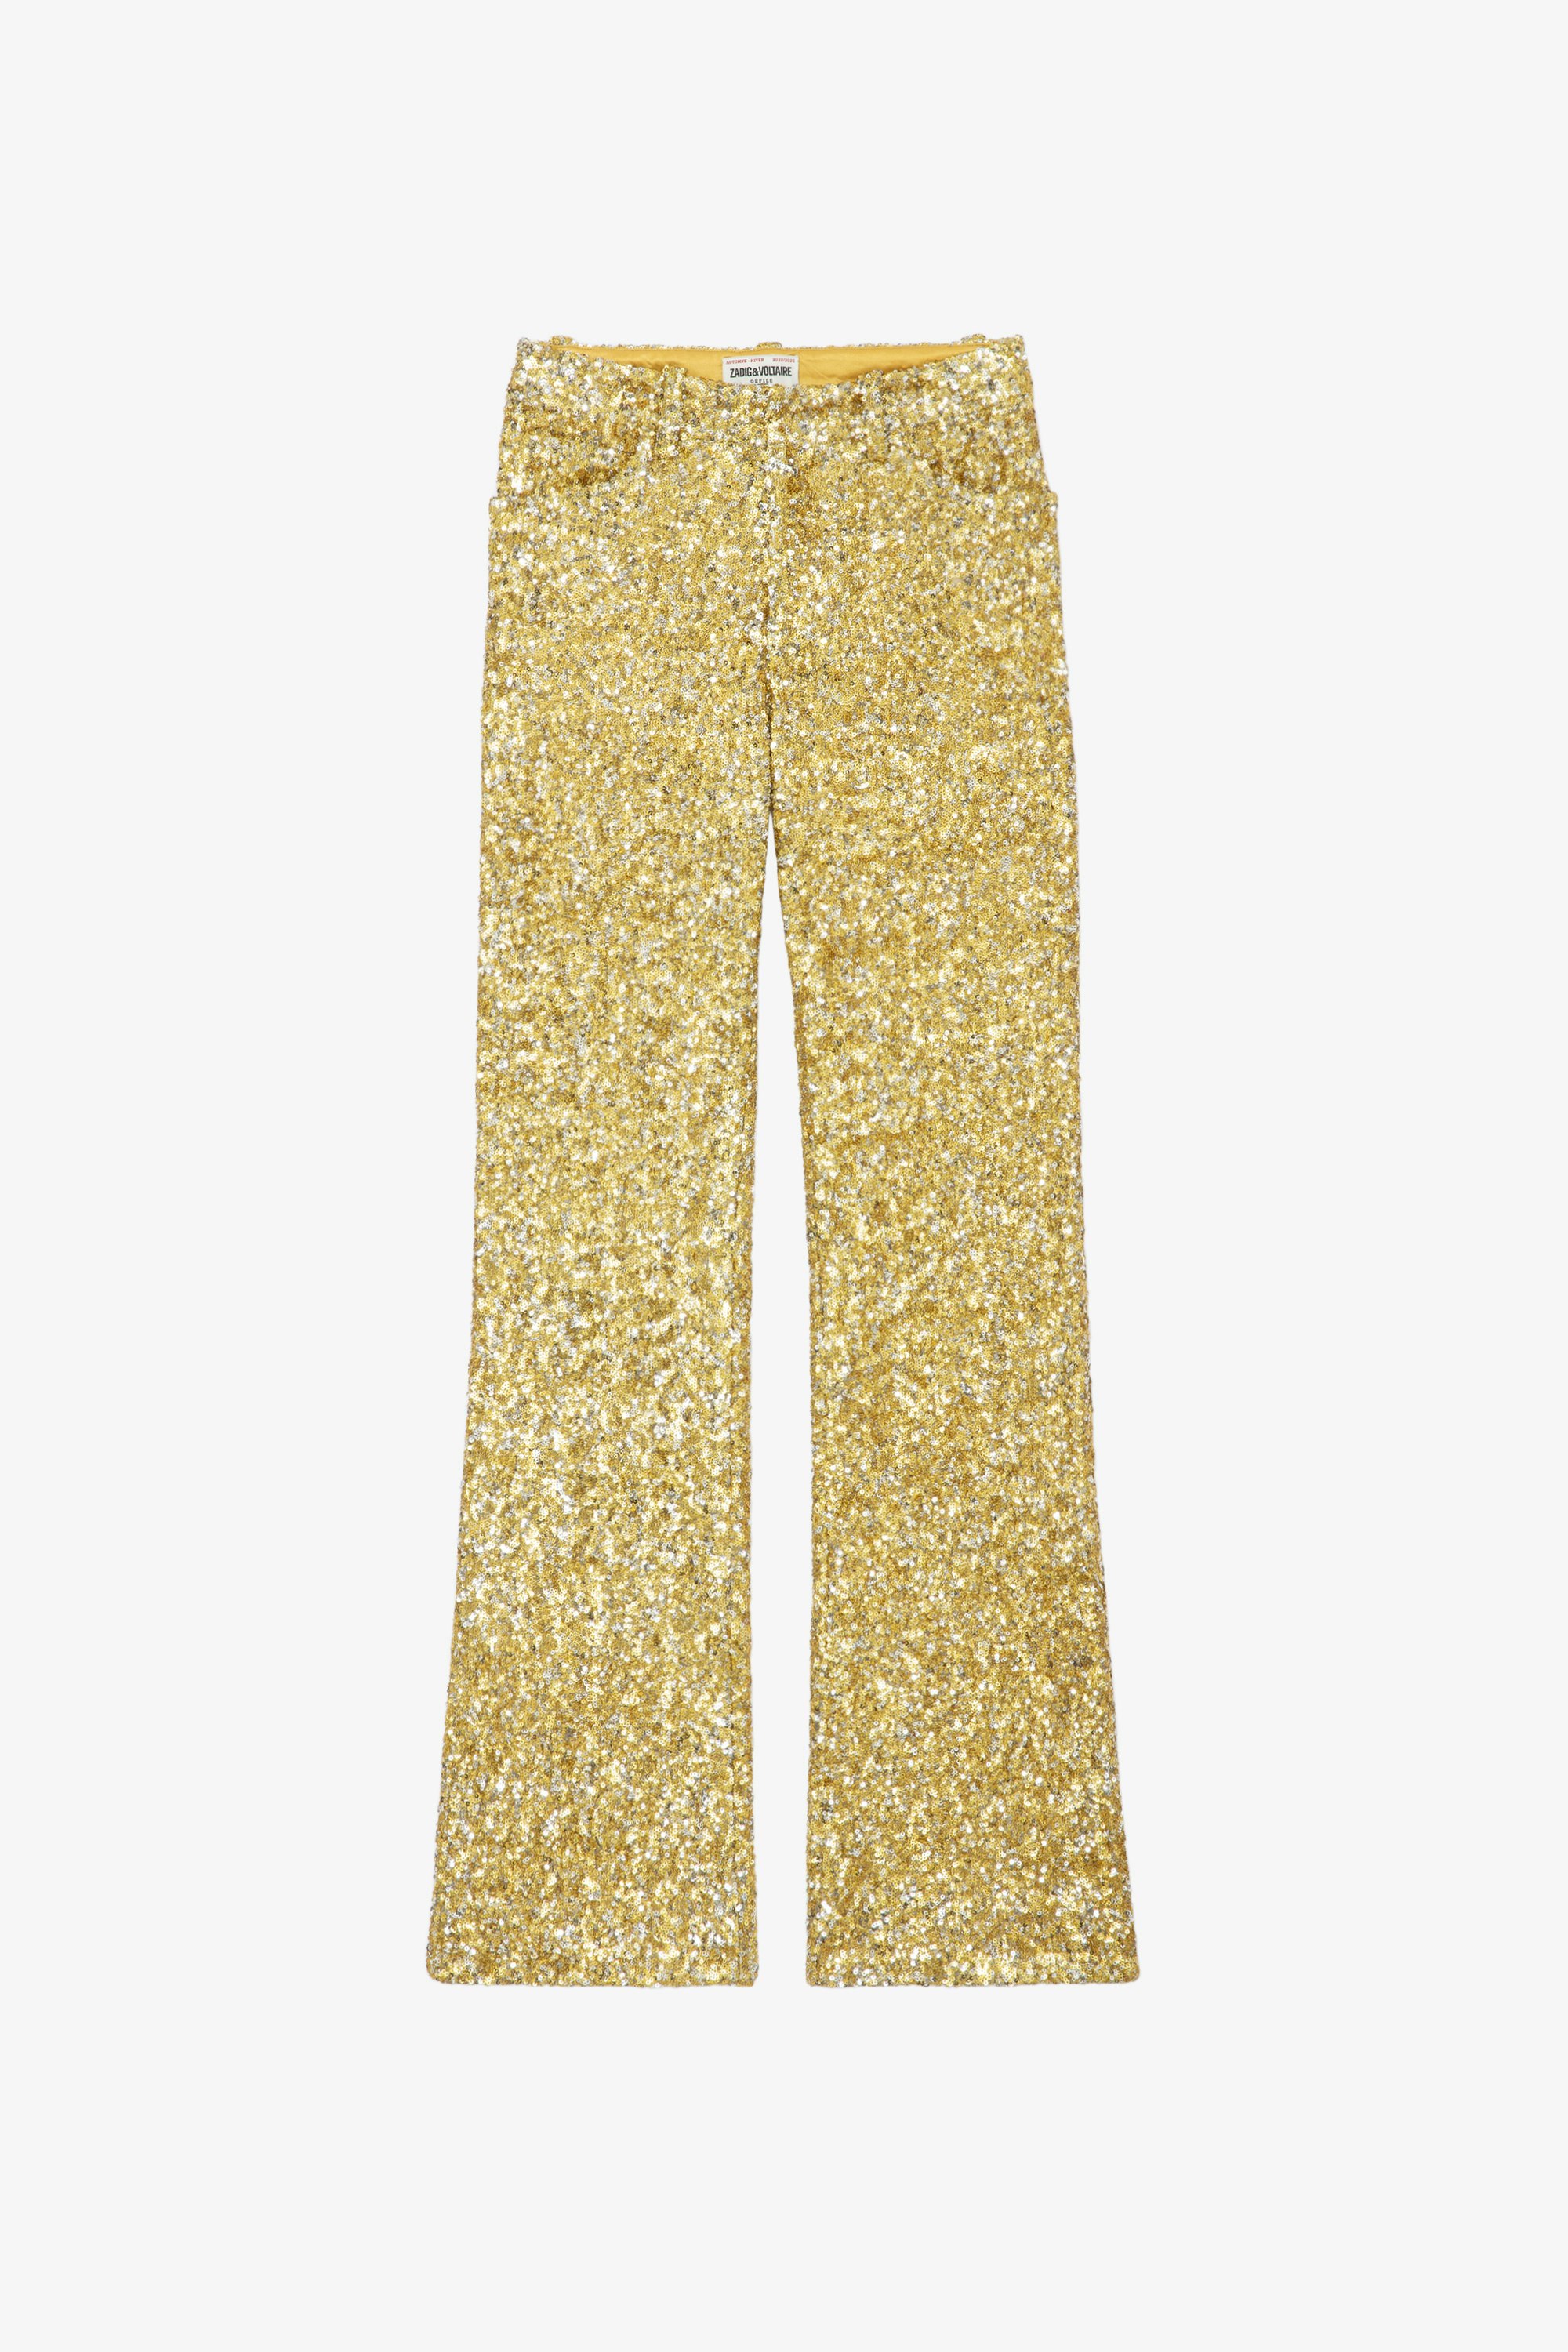 Pistol Trousers  Women's gold sequinned tailored trousers 